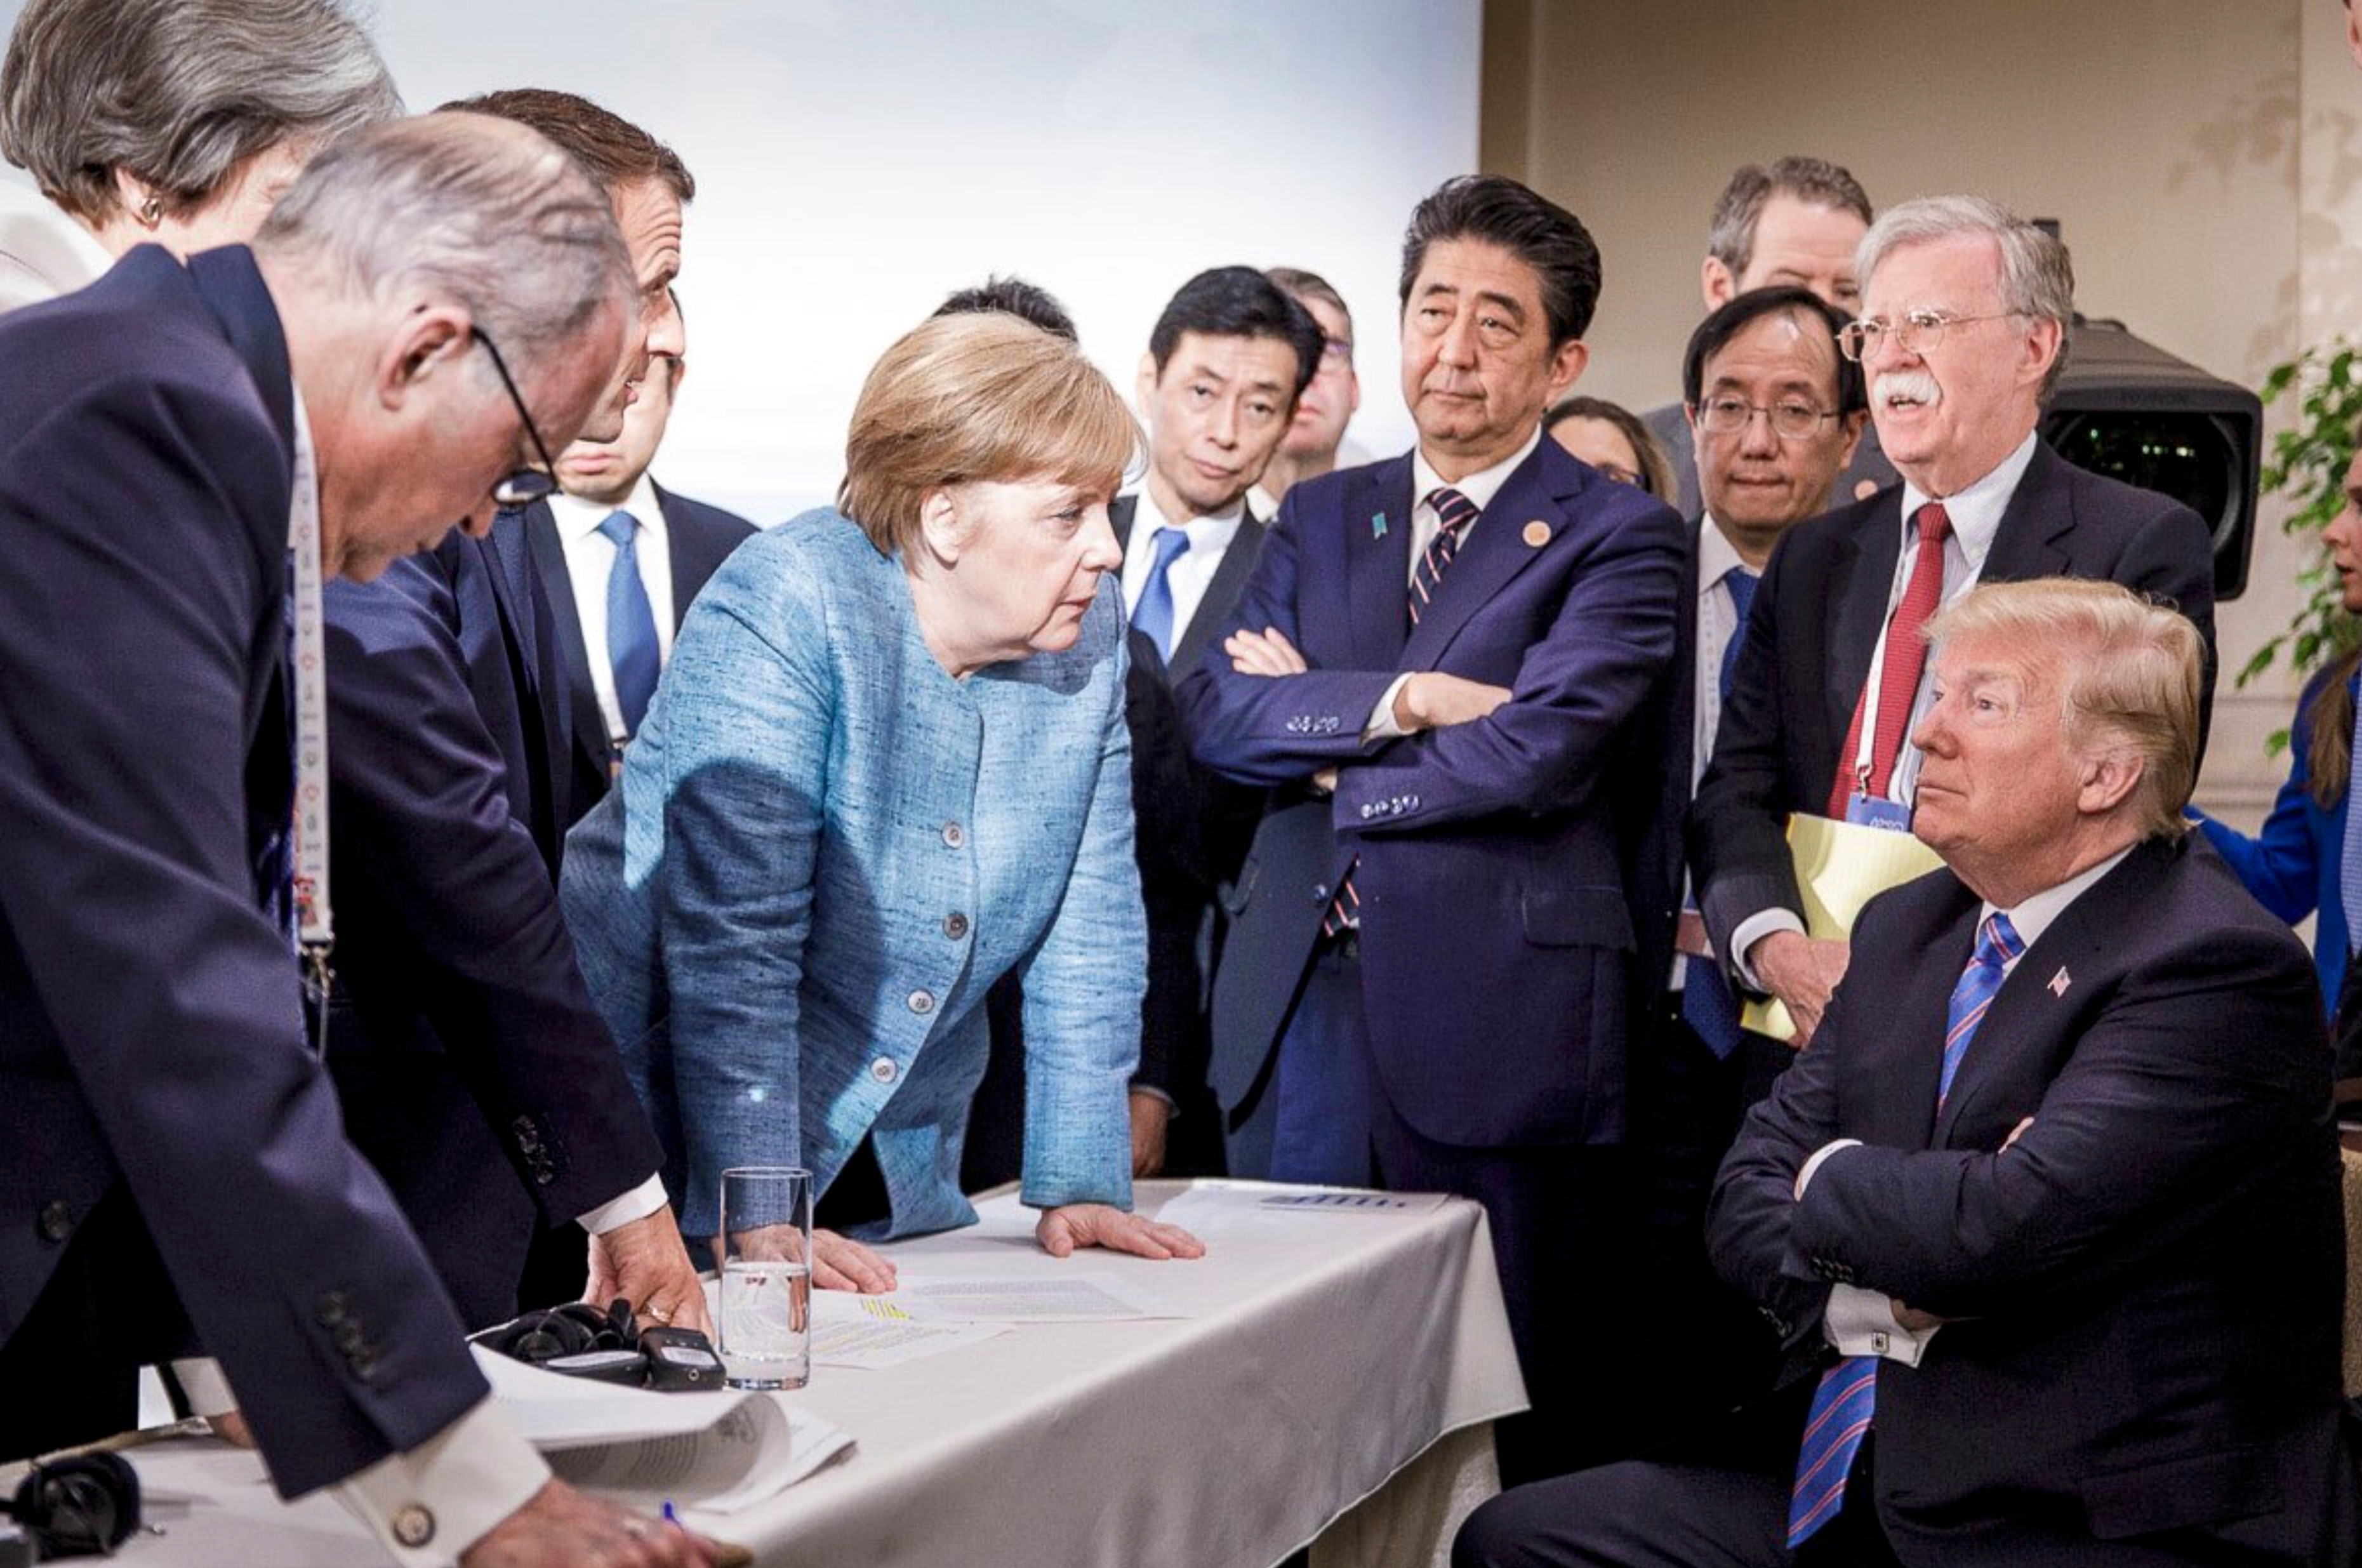 A symbolic photo of the 2018 G7 meeting shows German Chancellor Angela Merkel looking down on US President Donald Trump.